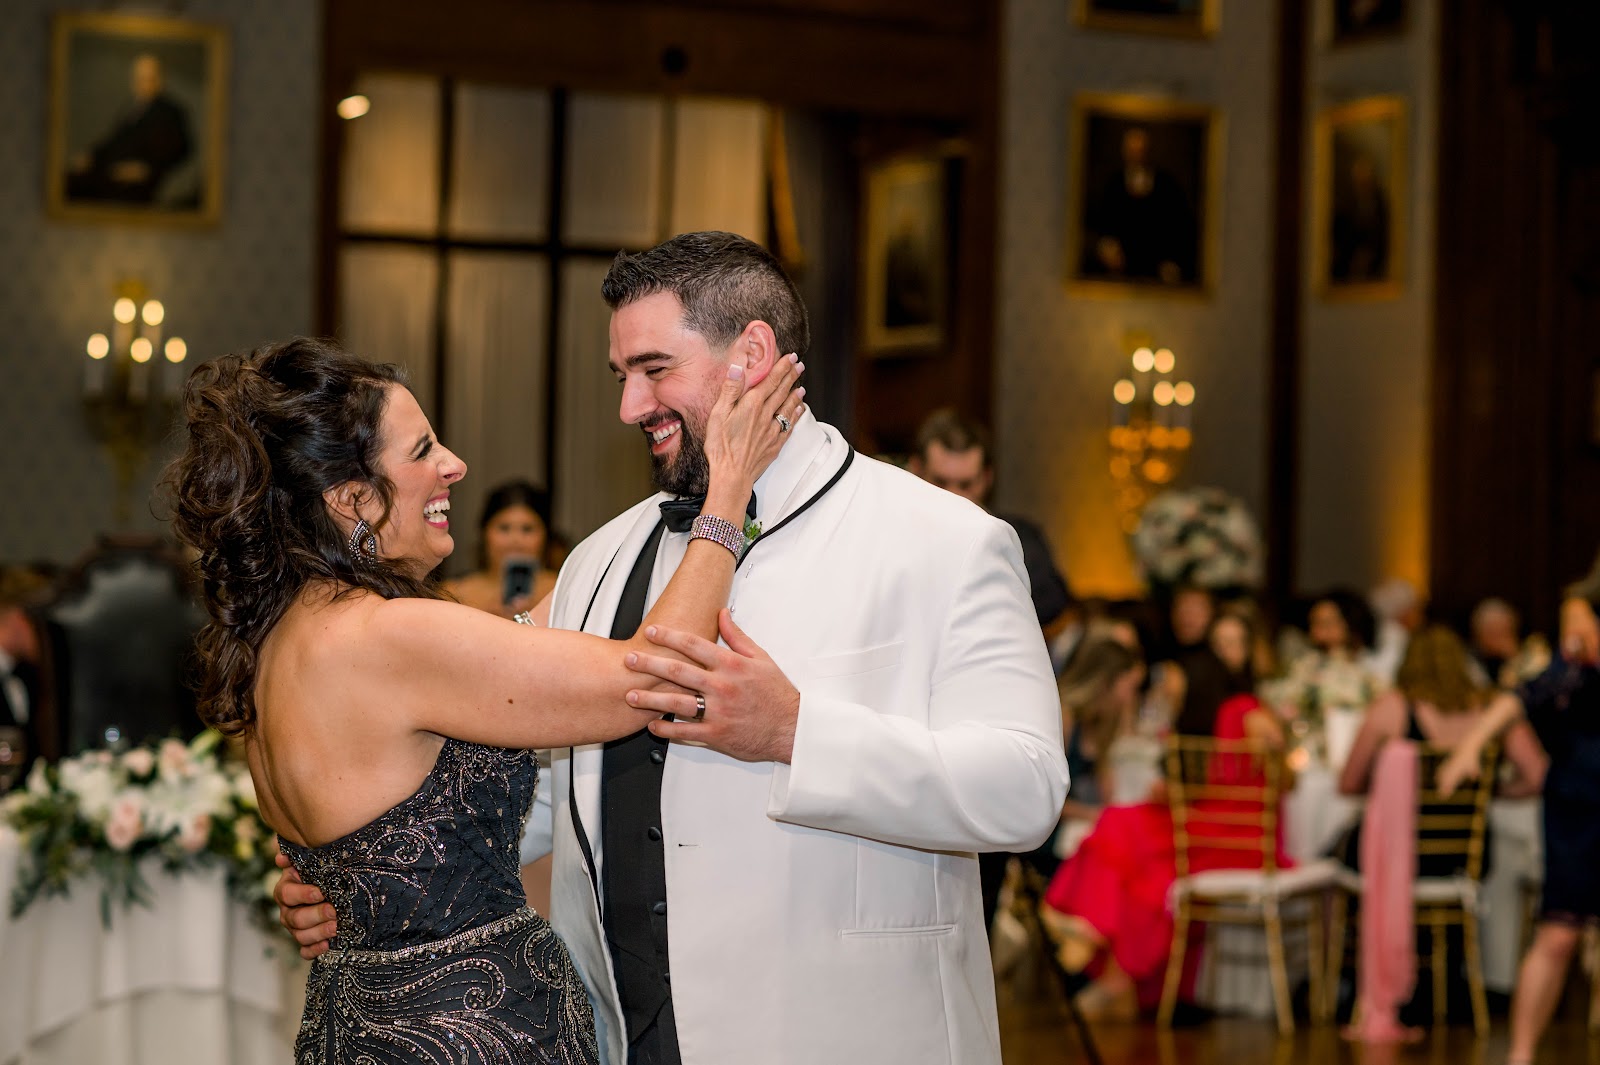 Documentary wedding photography demonstrated through a groom and mother of the groom enjoying their mother-son-dance.